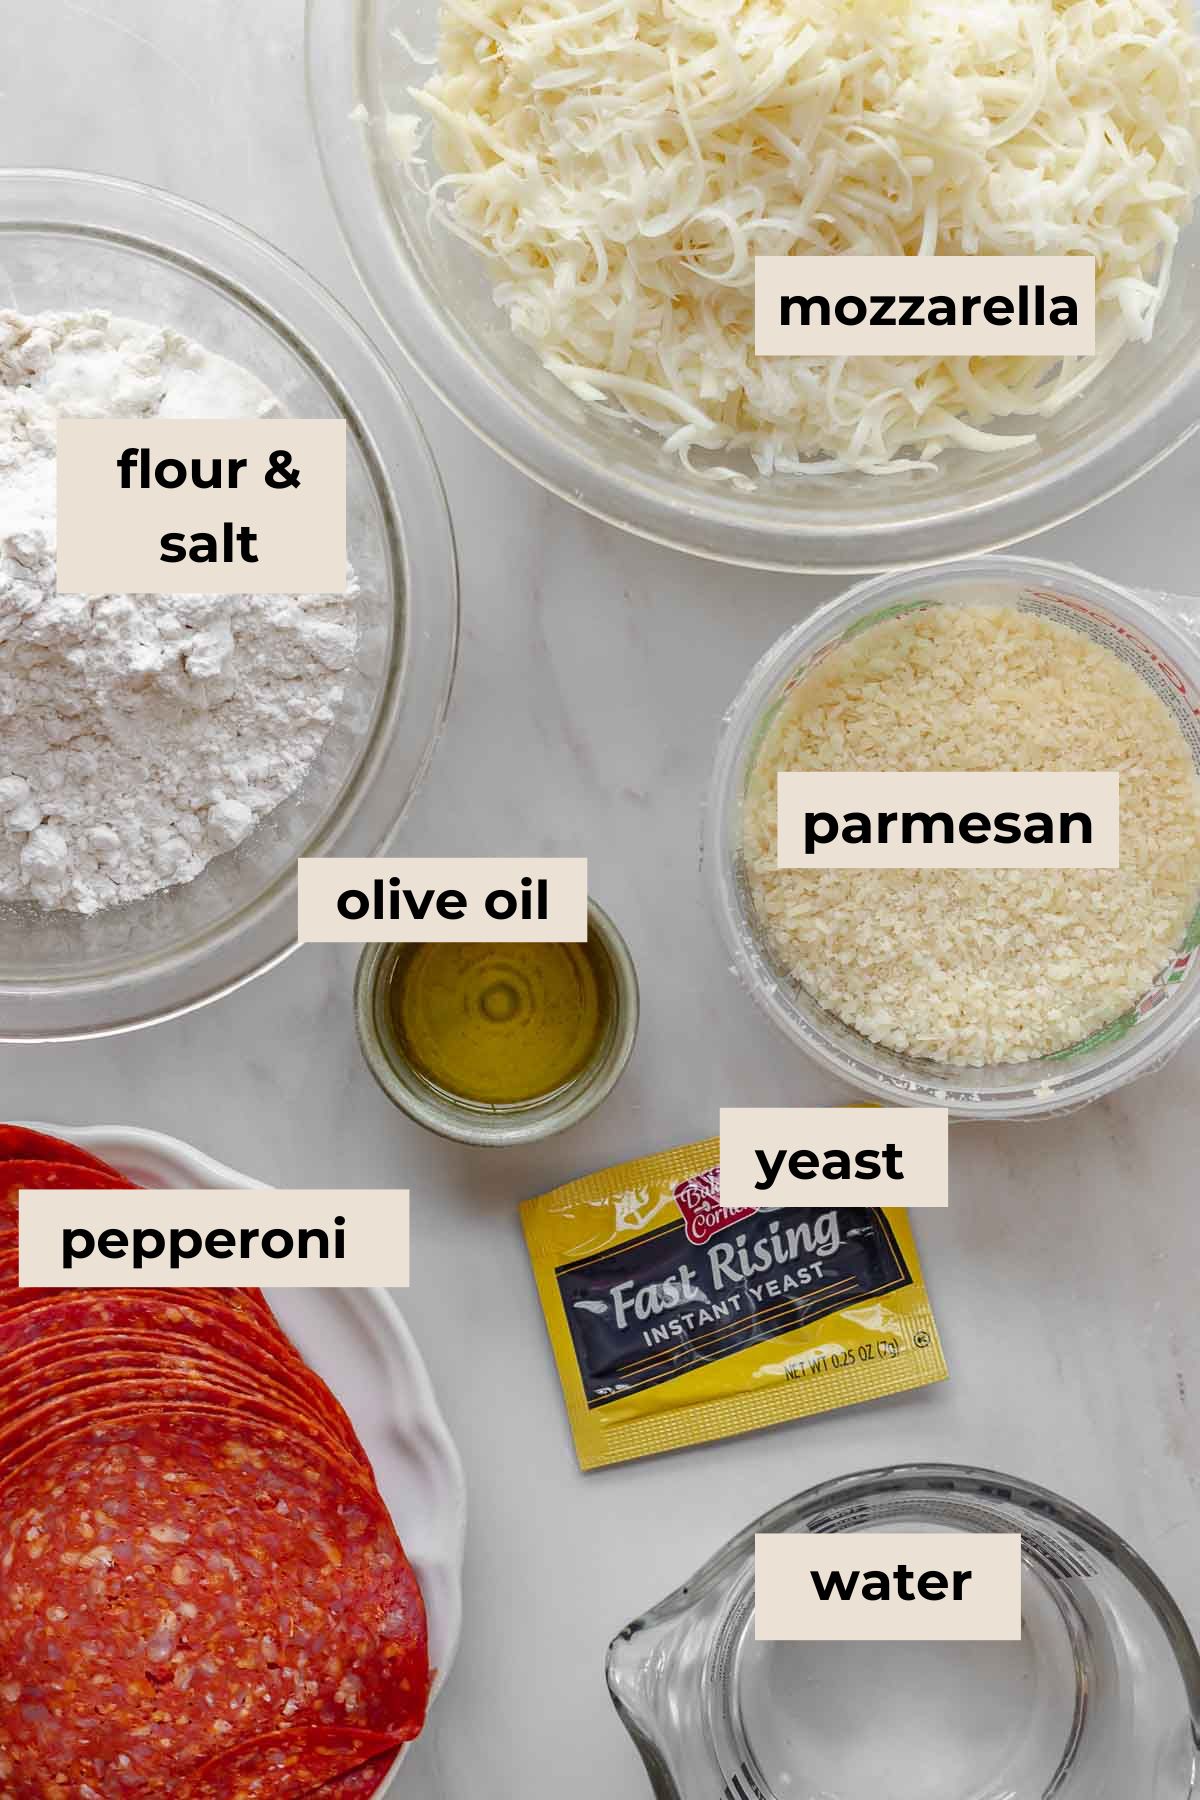 Ingredients for pepperoni bread.